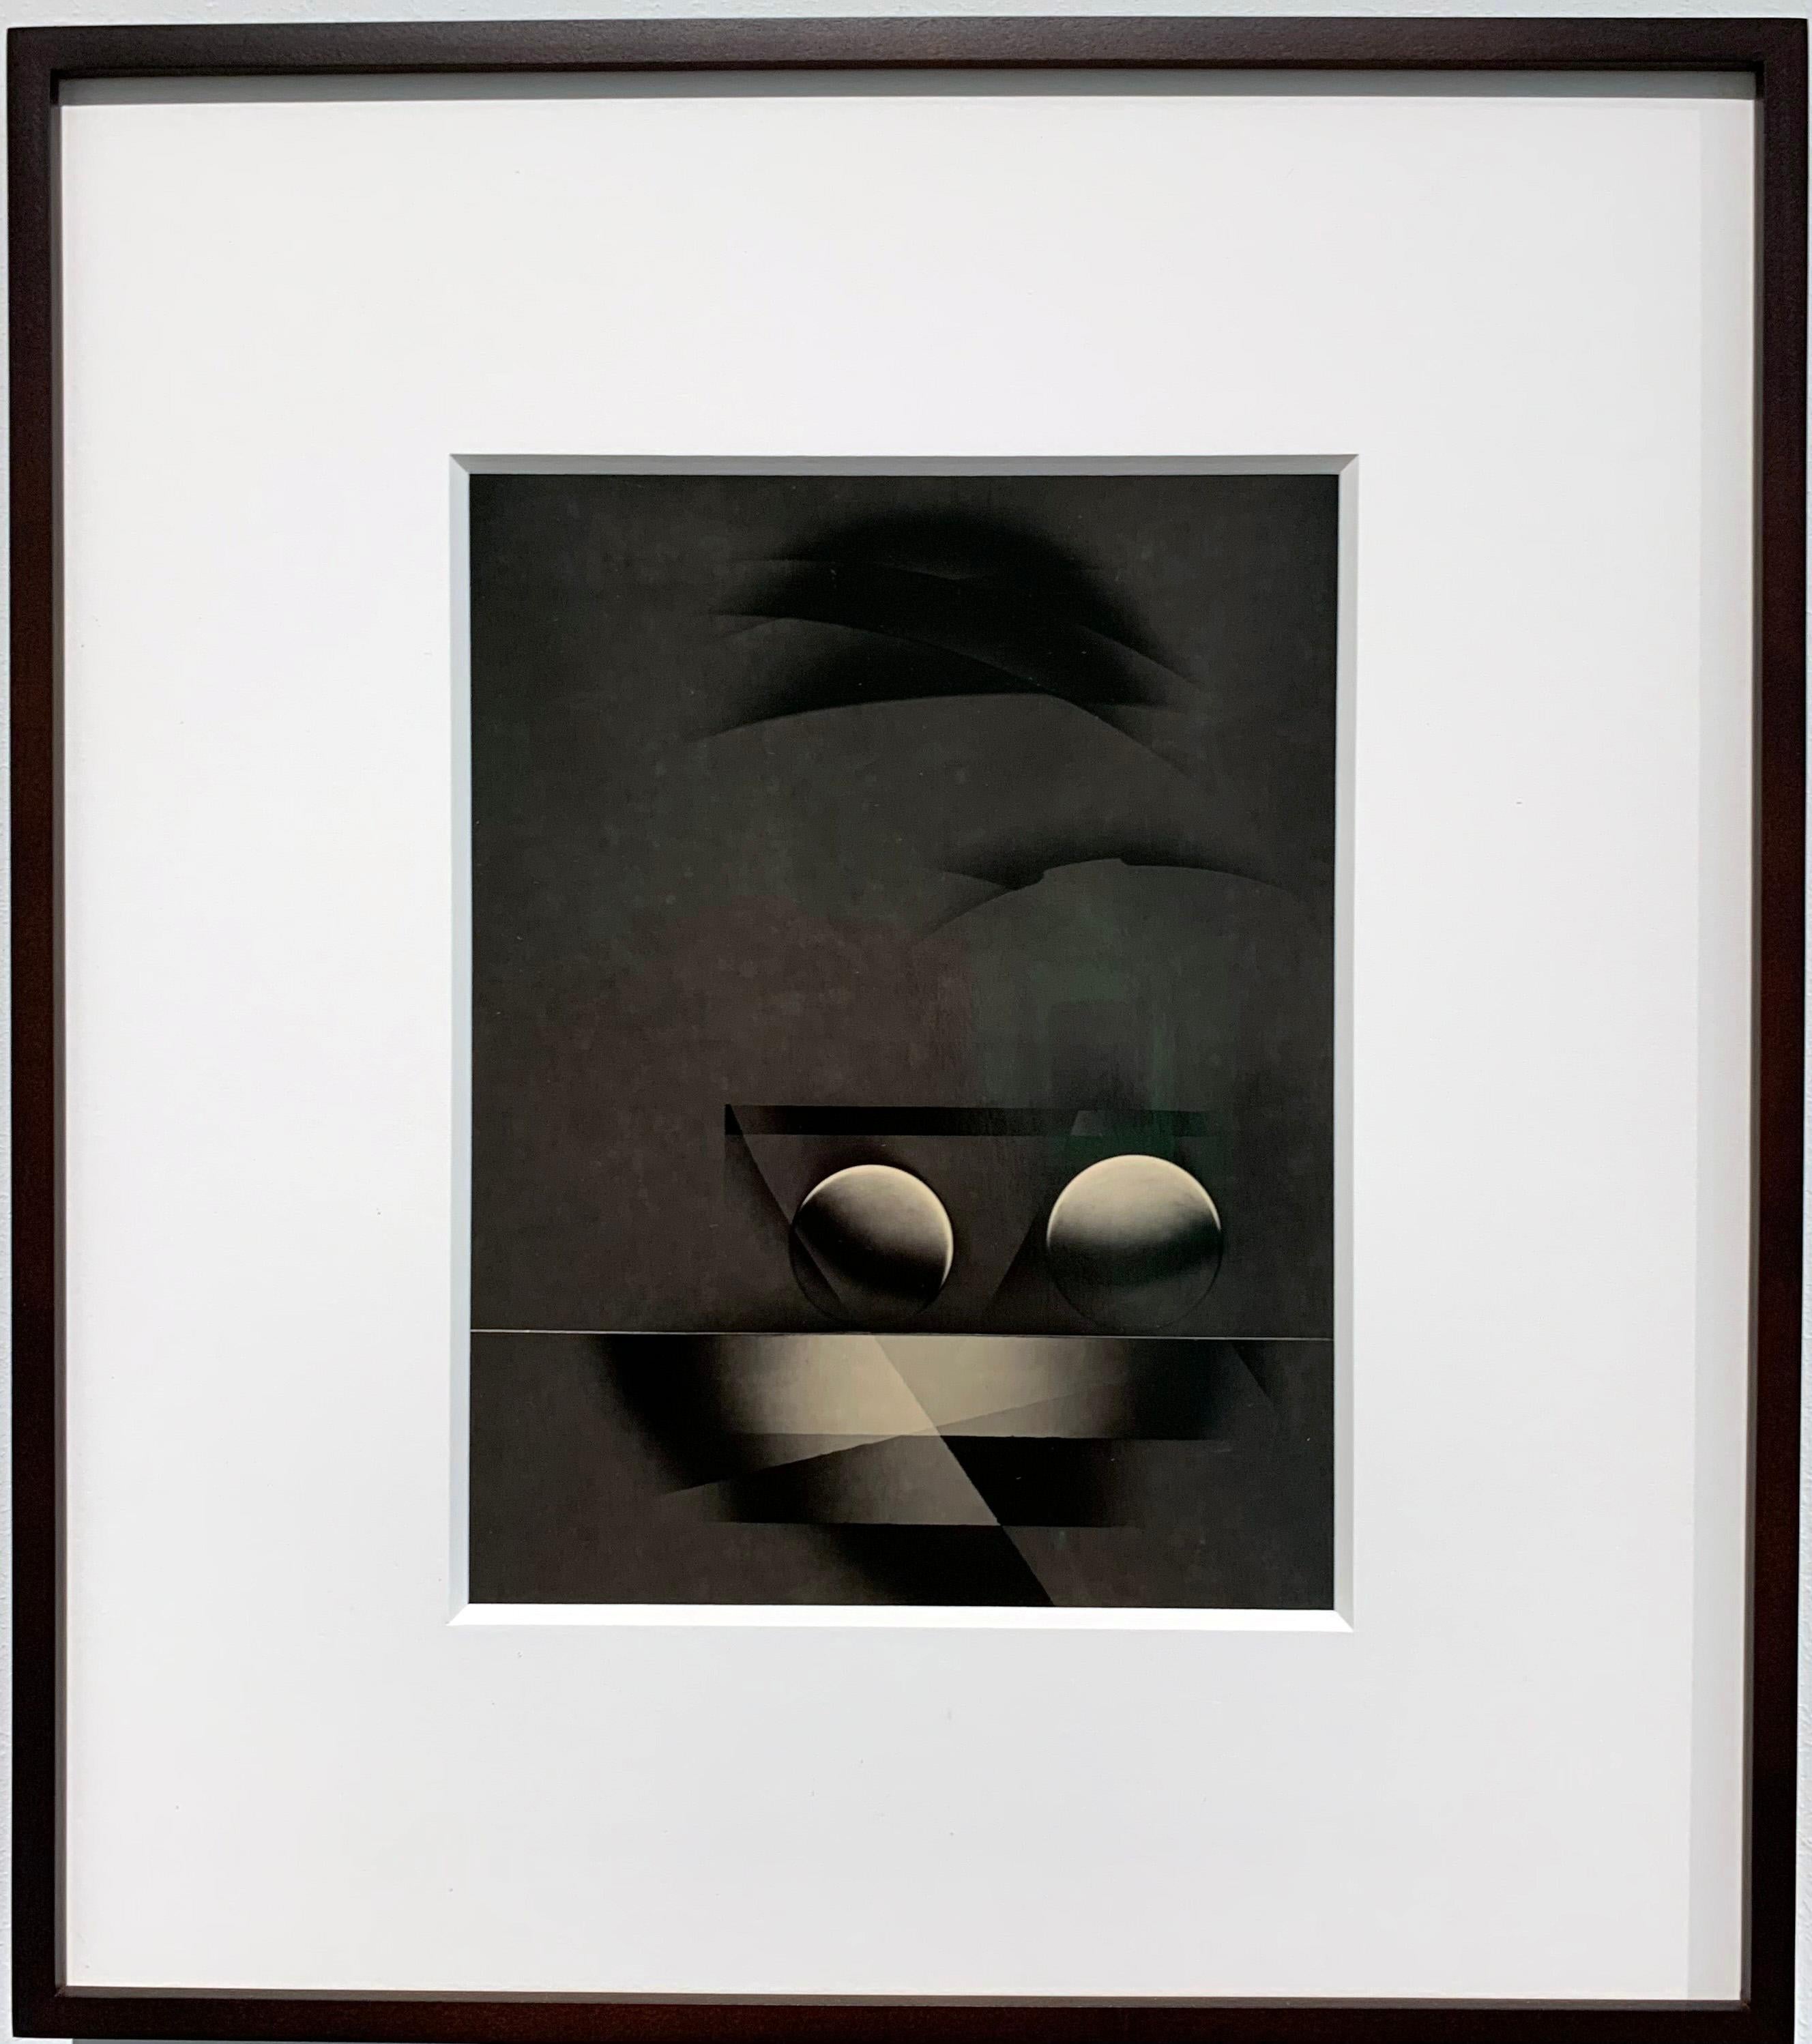 ATO>MIC #15, Unique Silver Luminogram Print, Warm toned black and white abstract - Photograph by Michael G Jackson